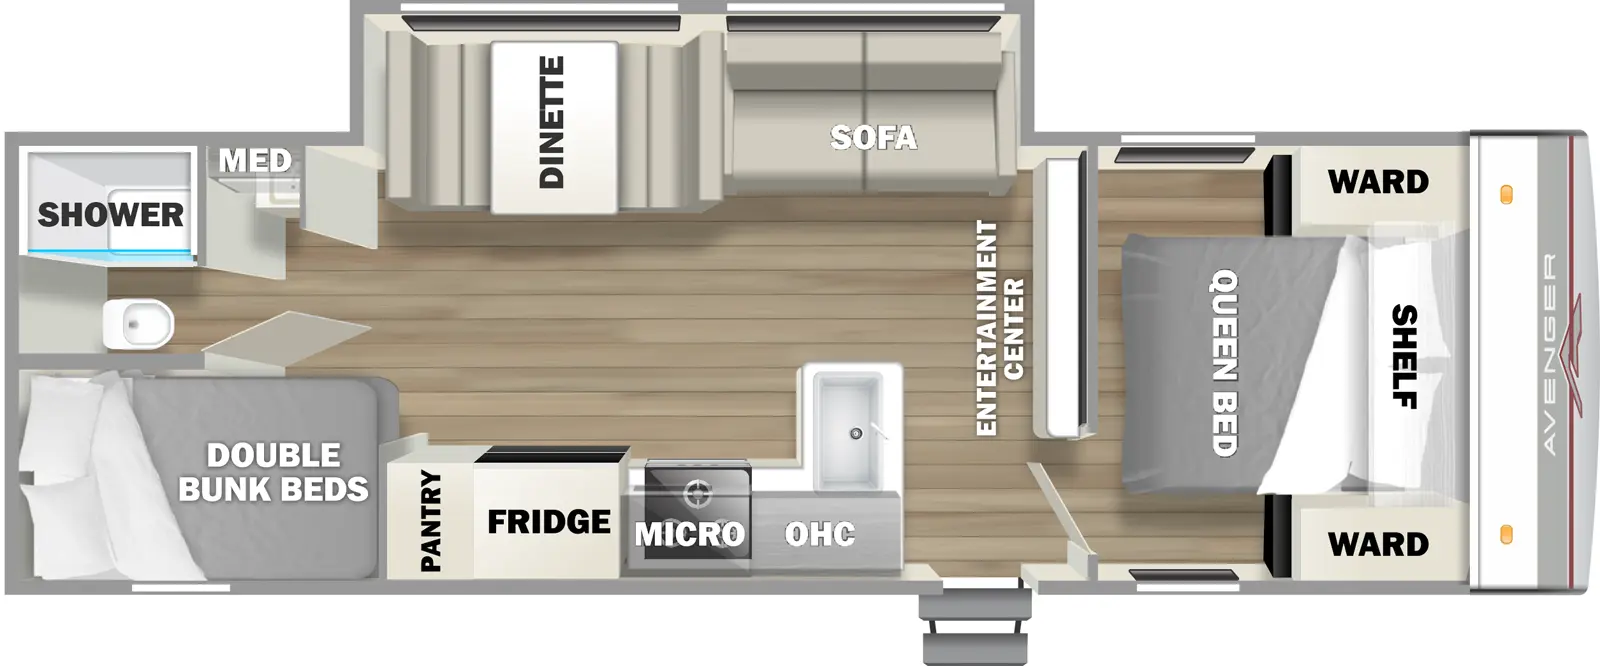 The 26DBSLE has one slideout and one entry. Interior layout front to back: foot facing queen bed with shelf above and wardrobes on each side; entertainment center along inner wall; off-door side slideout with sofa and dinette; door side entry, peninsula kitchen counter with sink, overhead cabinet, microwave, cooktop, refrigerator, and pantry; rear off-door sink and medicine cabinet with shower and toilet in a separate room; rear door side double bunk beds.